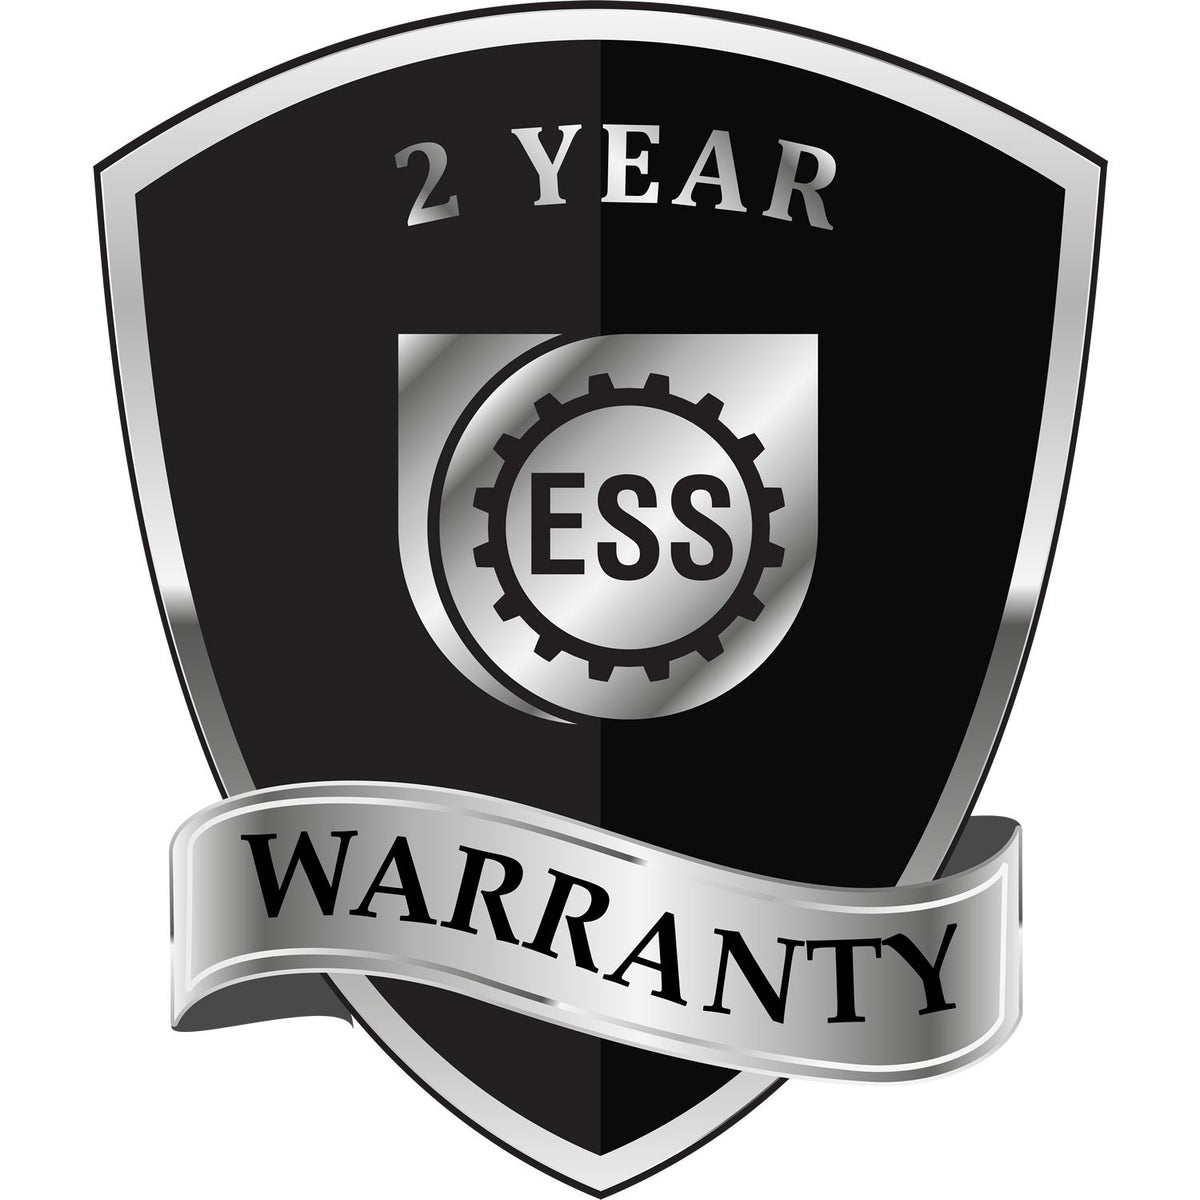 A black and silver badge or emblem showing warranty information for the Gift Montana Land Surveyor Seal